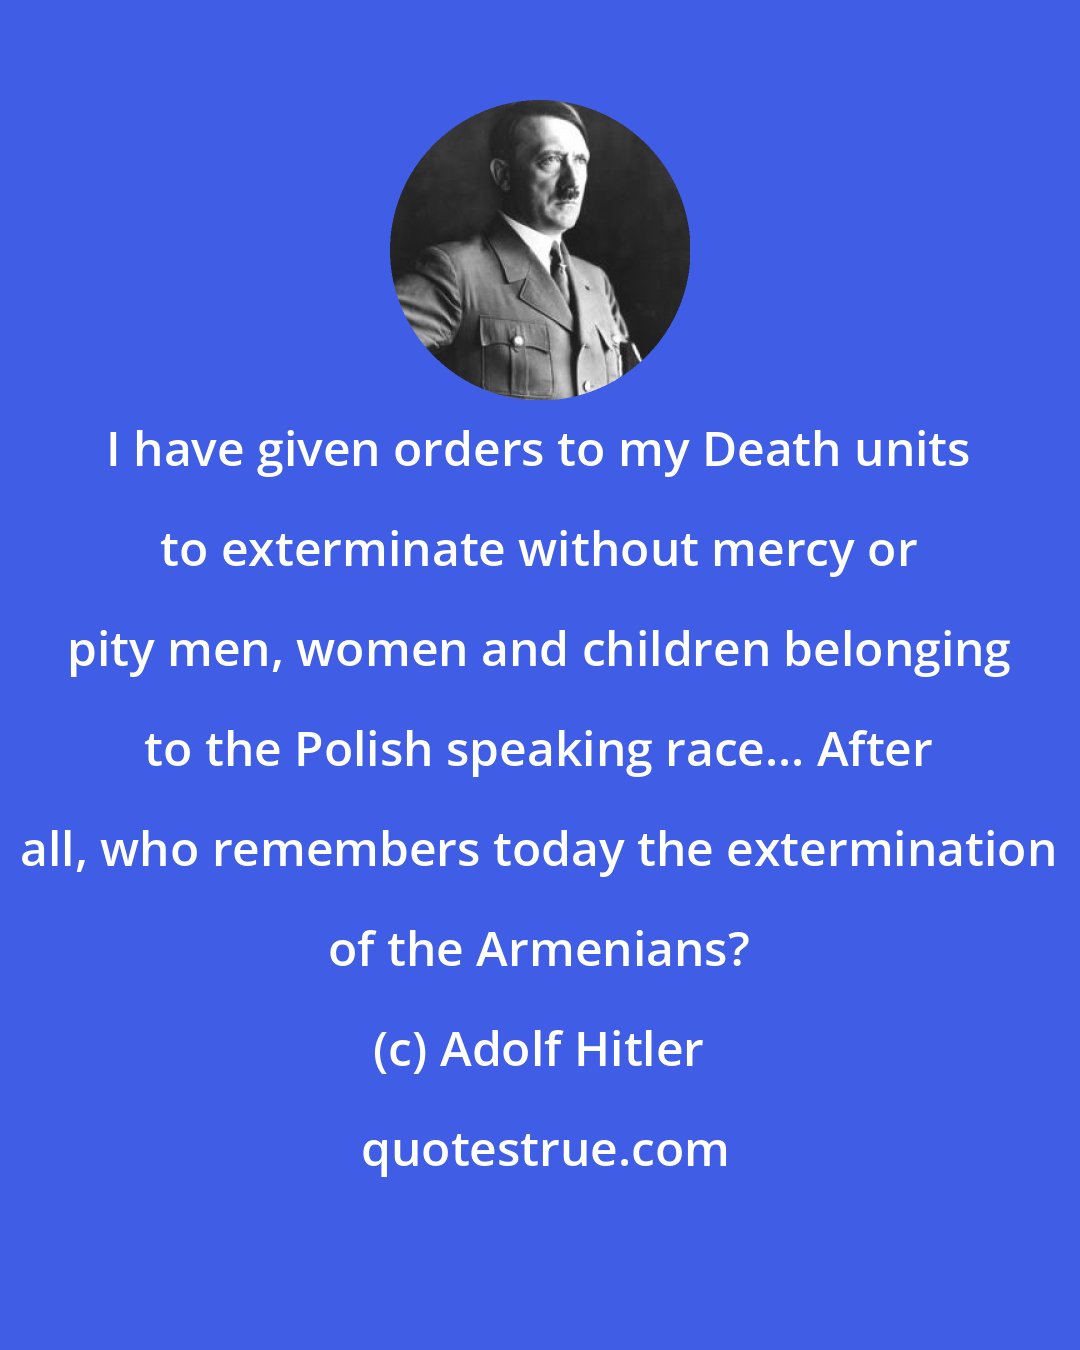 Adolf Hitler: I have given orders to my Death units to exterminate without mercy or pity men, women and children belonging to the Polish speaking race... After all, who remembers today the extermination of the Armenians?